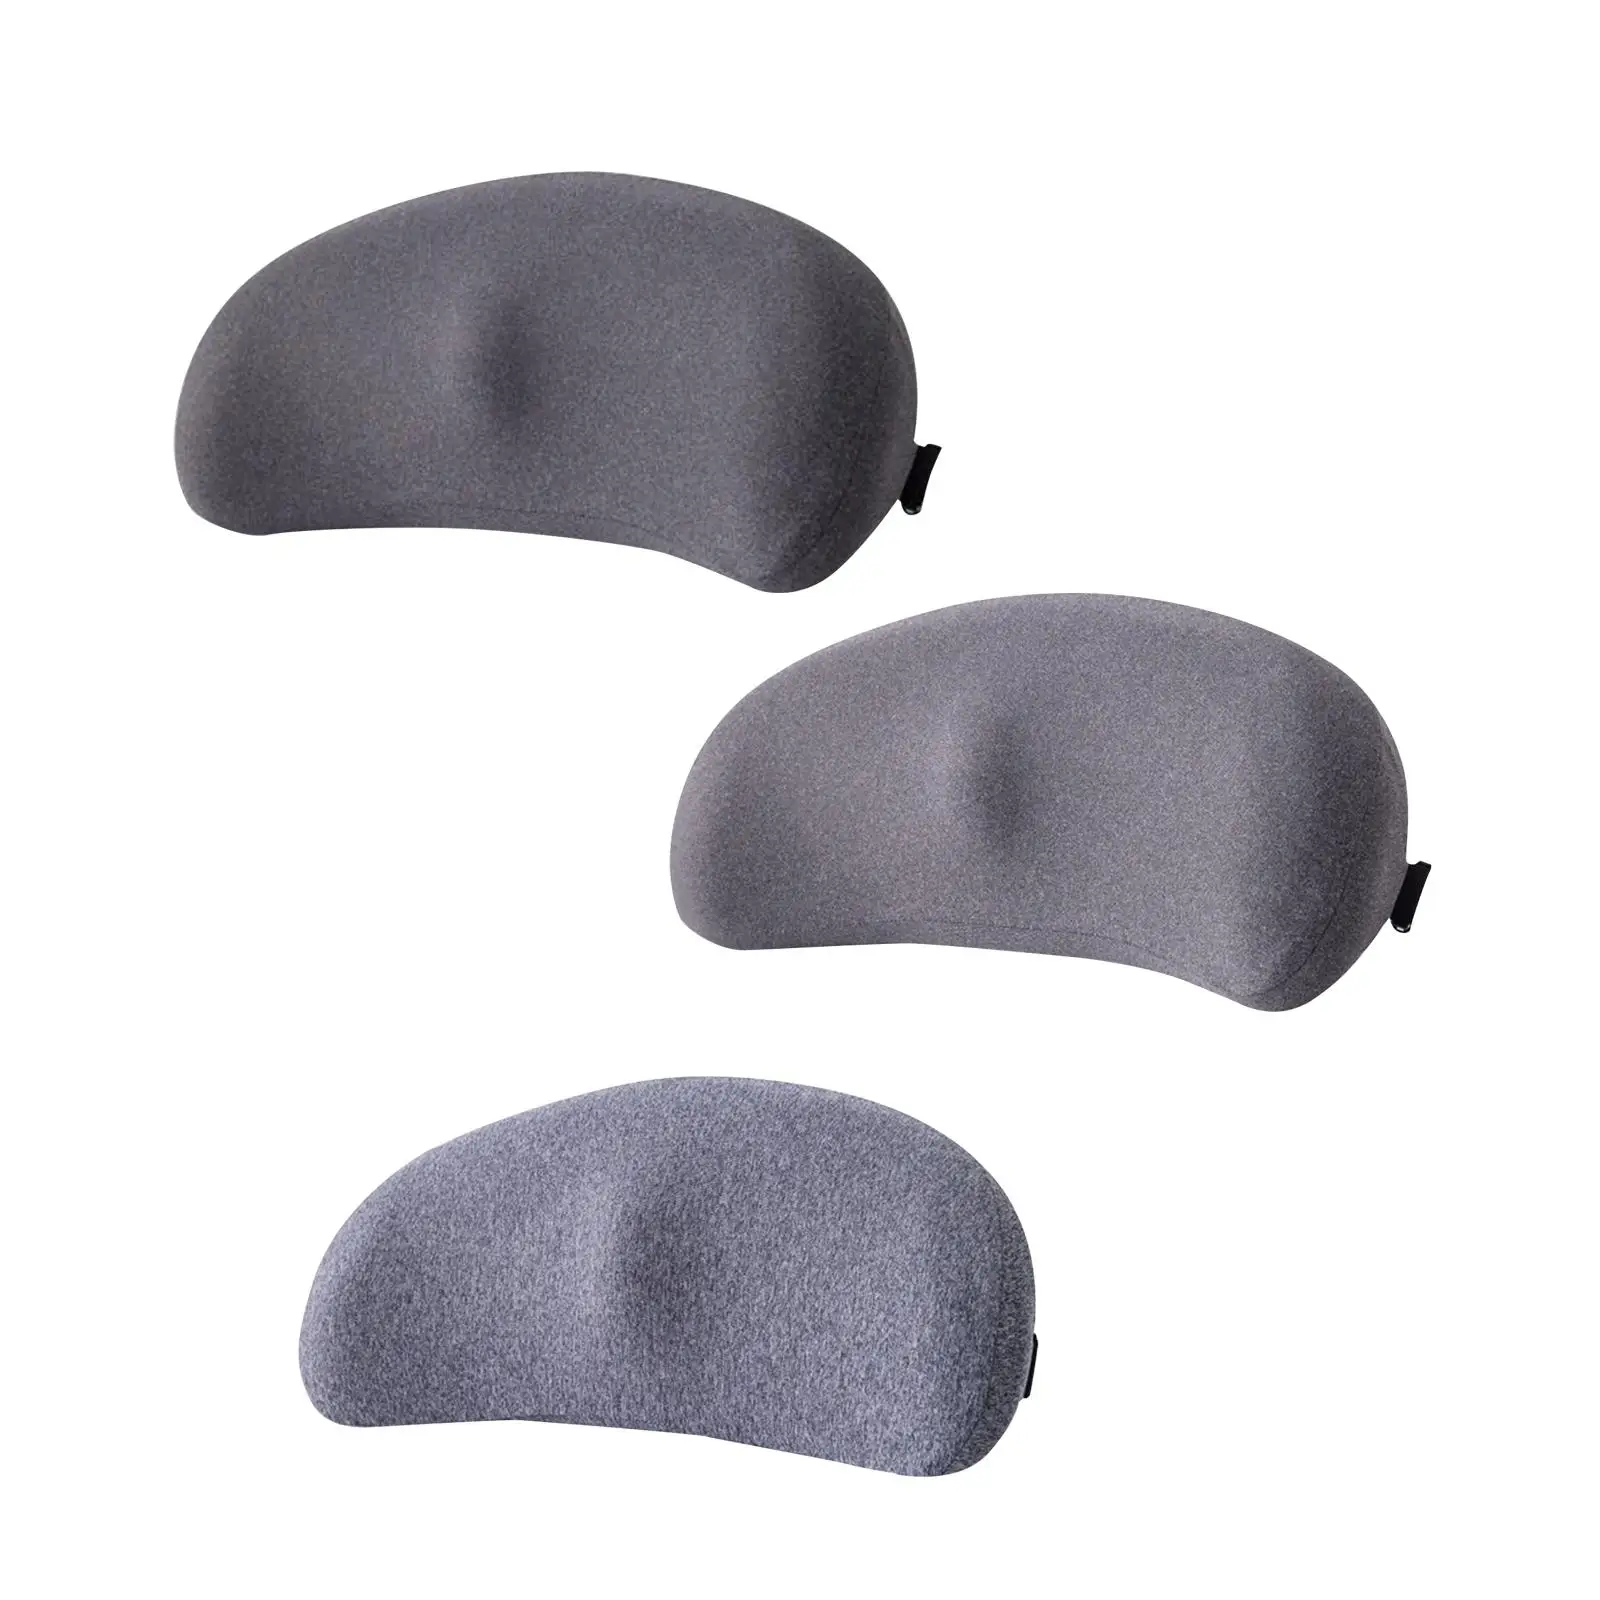 Lower Back Cushion Memory Foam Chair Pads for Sleeping Rest recliner Home Travel